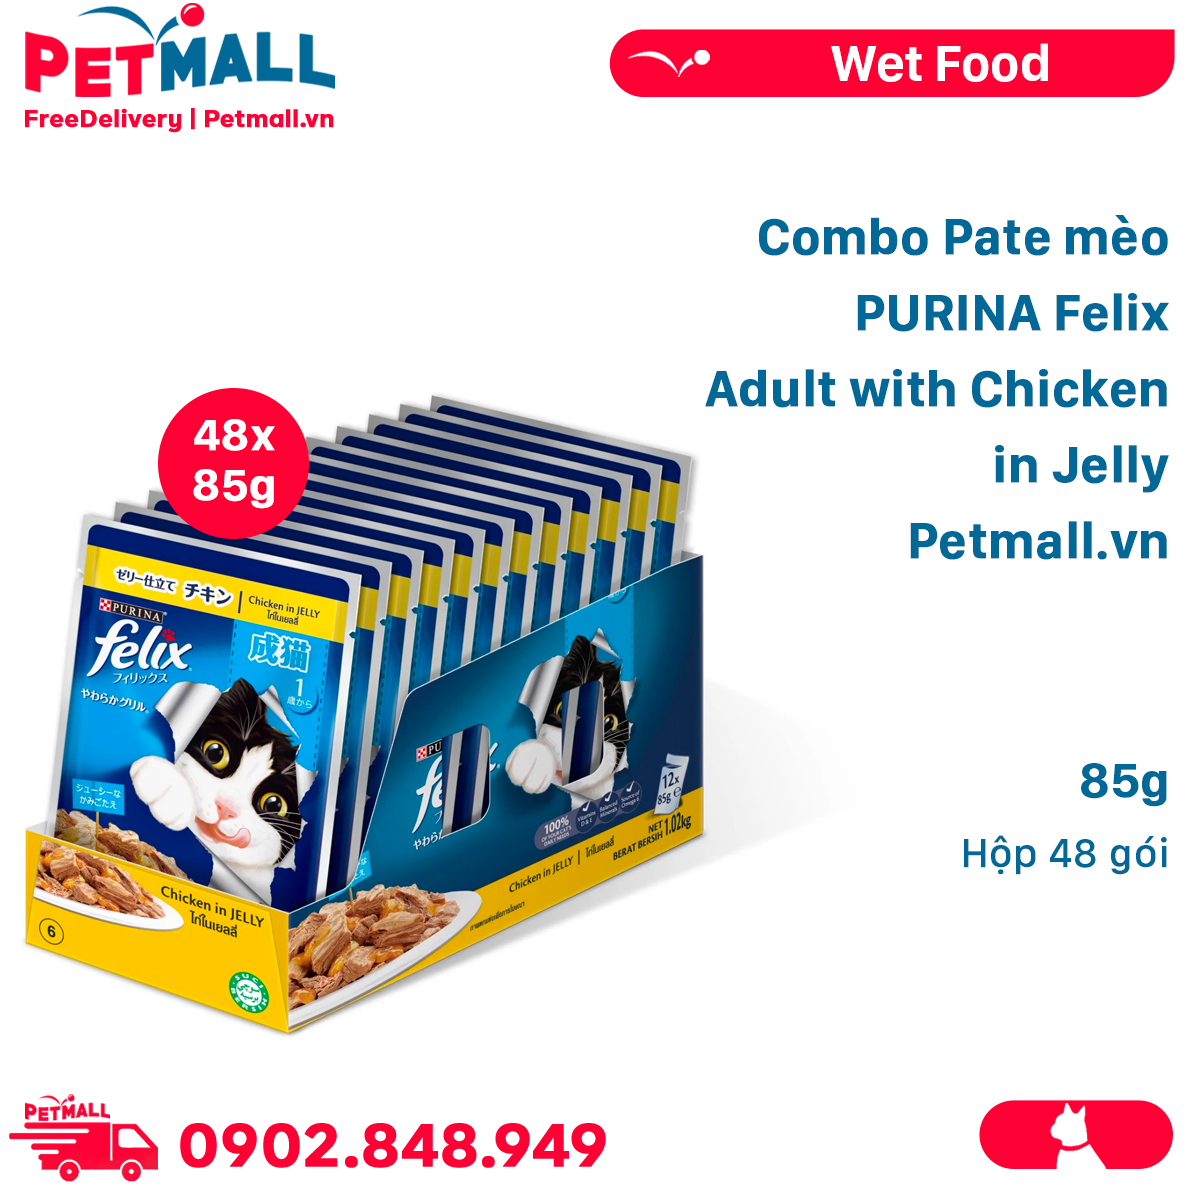 Combo Pate mèo PURINA Felix Adult with Chicken in Jelly 85g